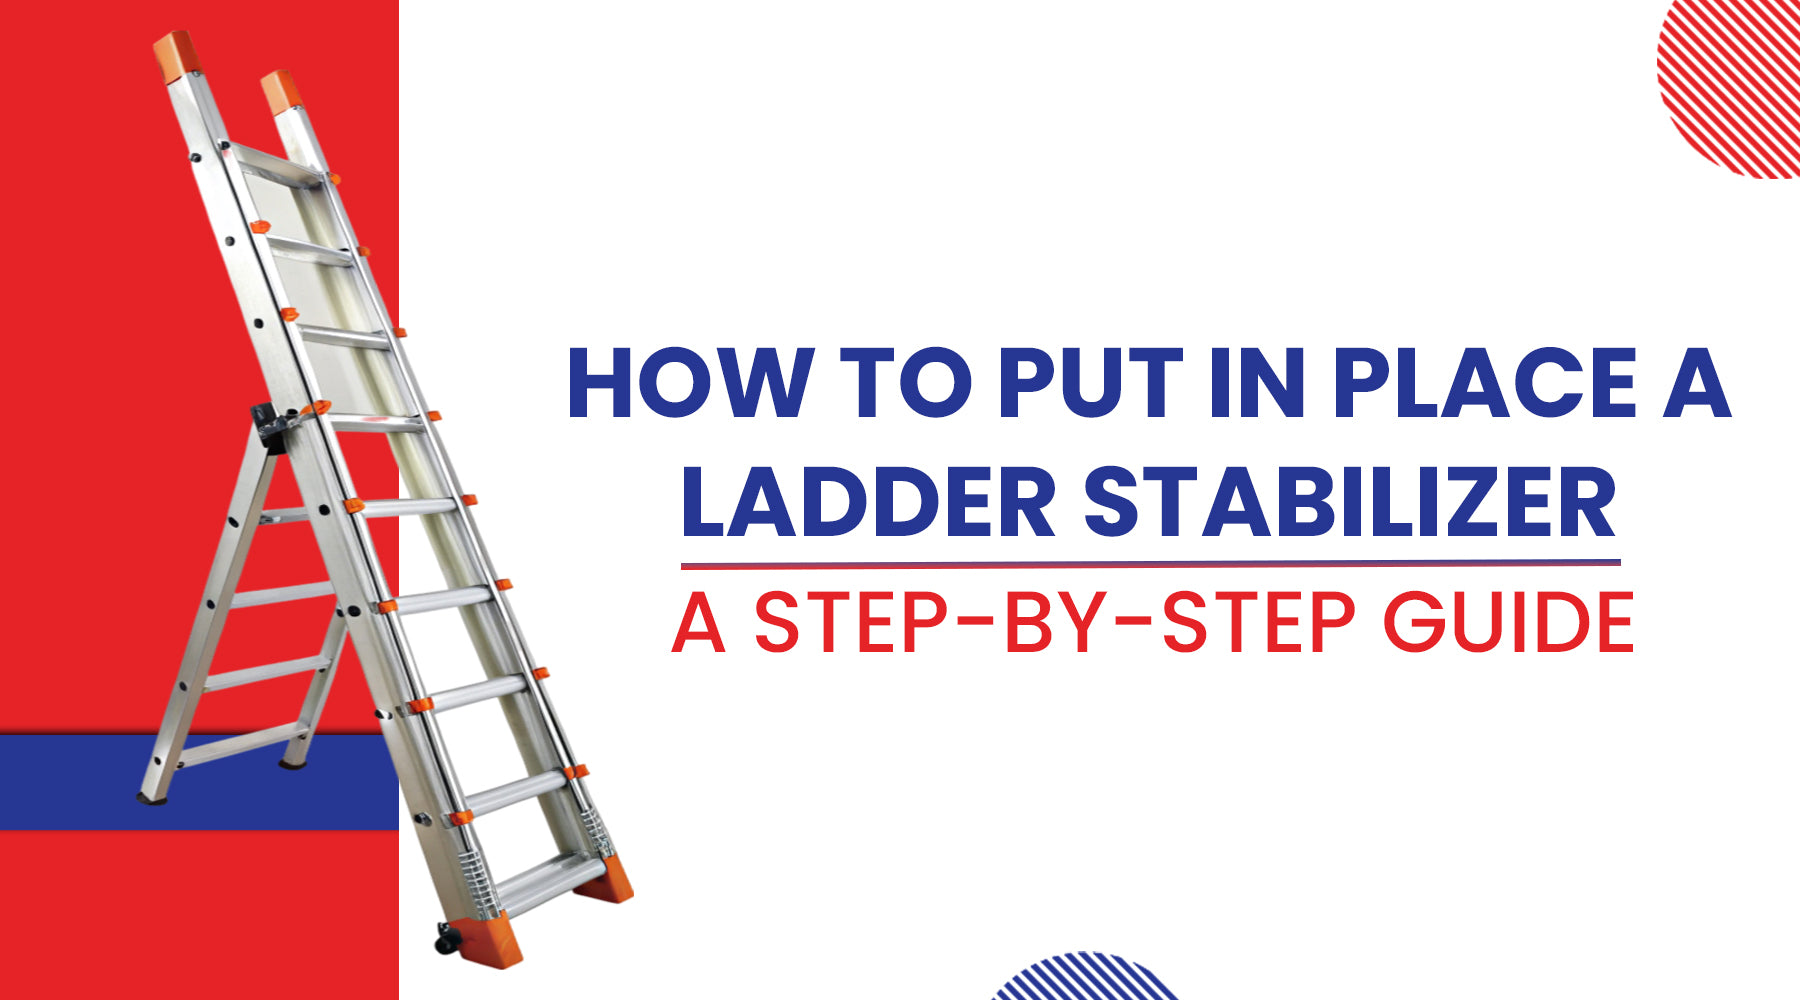 How to Put in Place a Ladder Stabilizer